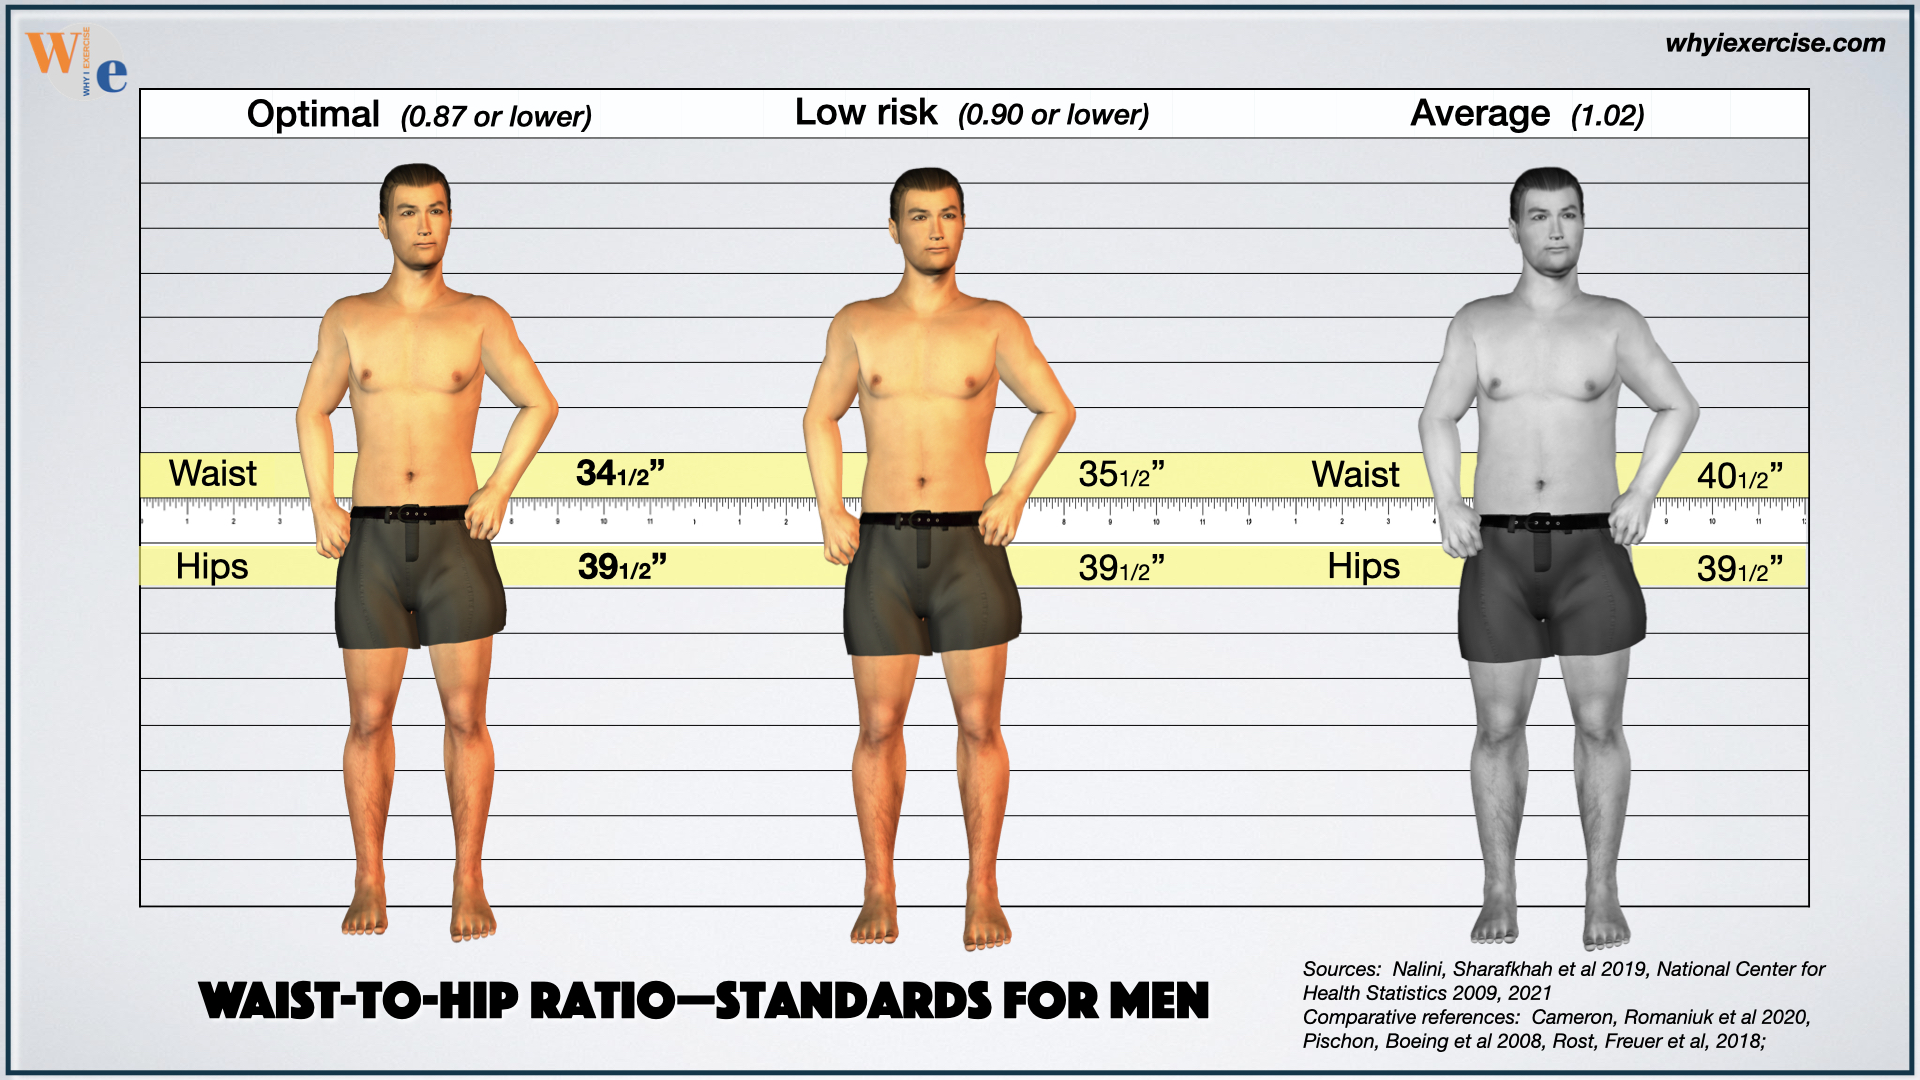 Waist circumference and waist-to-hip ratio guidelines